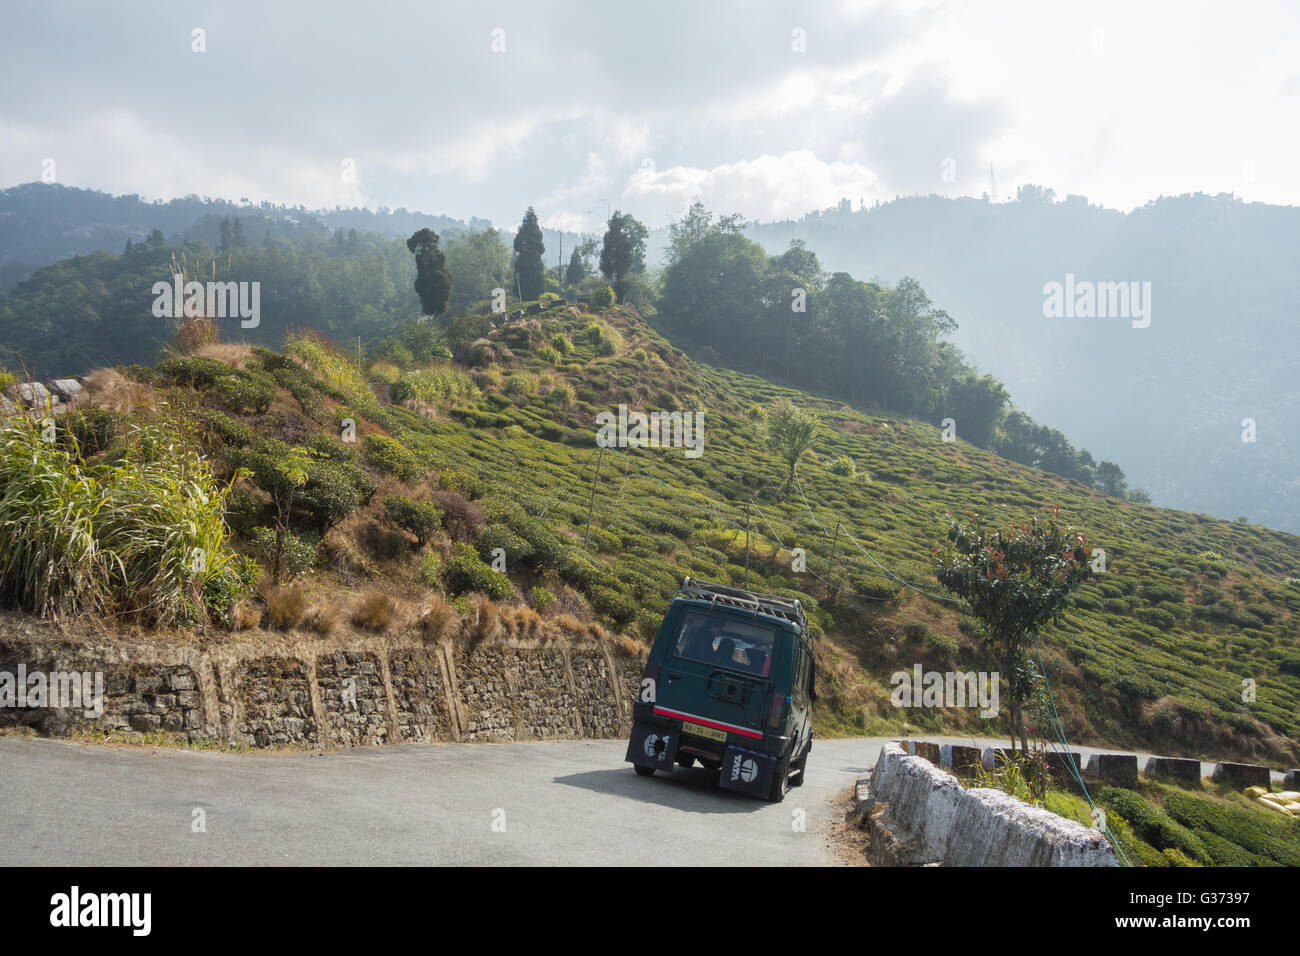 Tata Sumo car going downhill on Bloomfield Road, Darjeeling, West Bengal, India Stock Photo